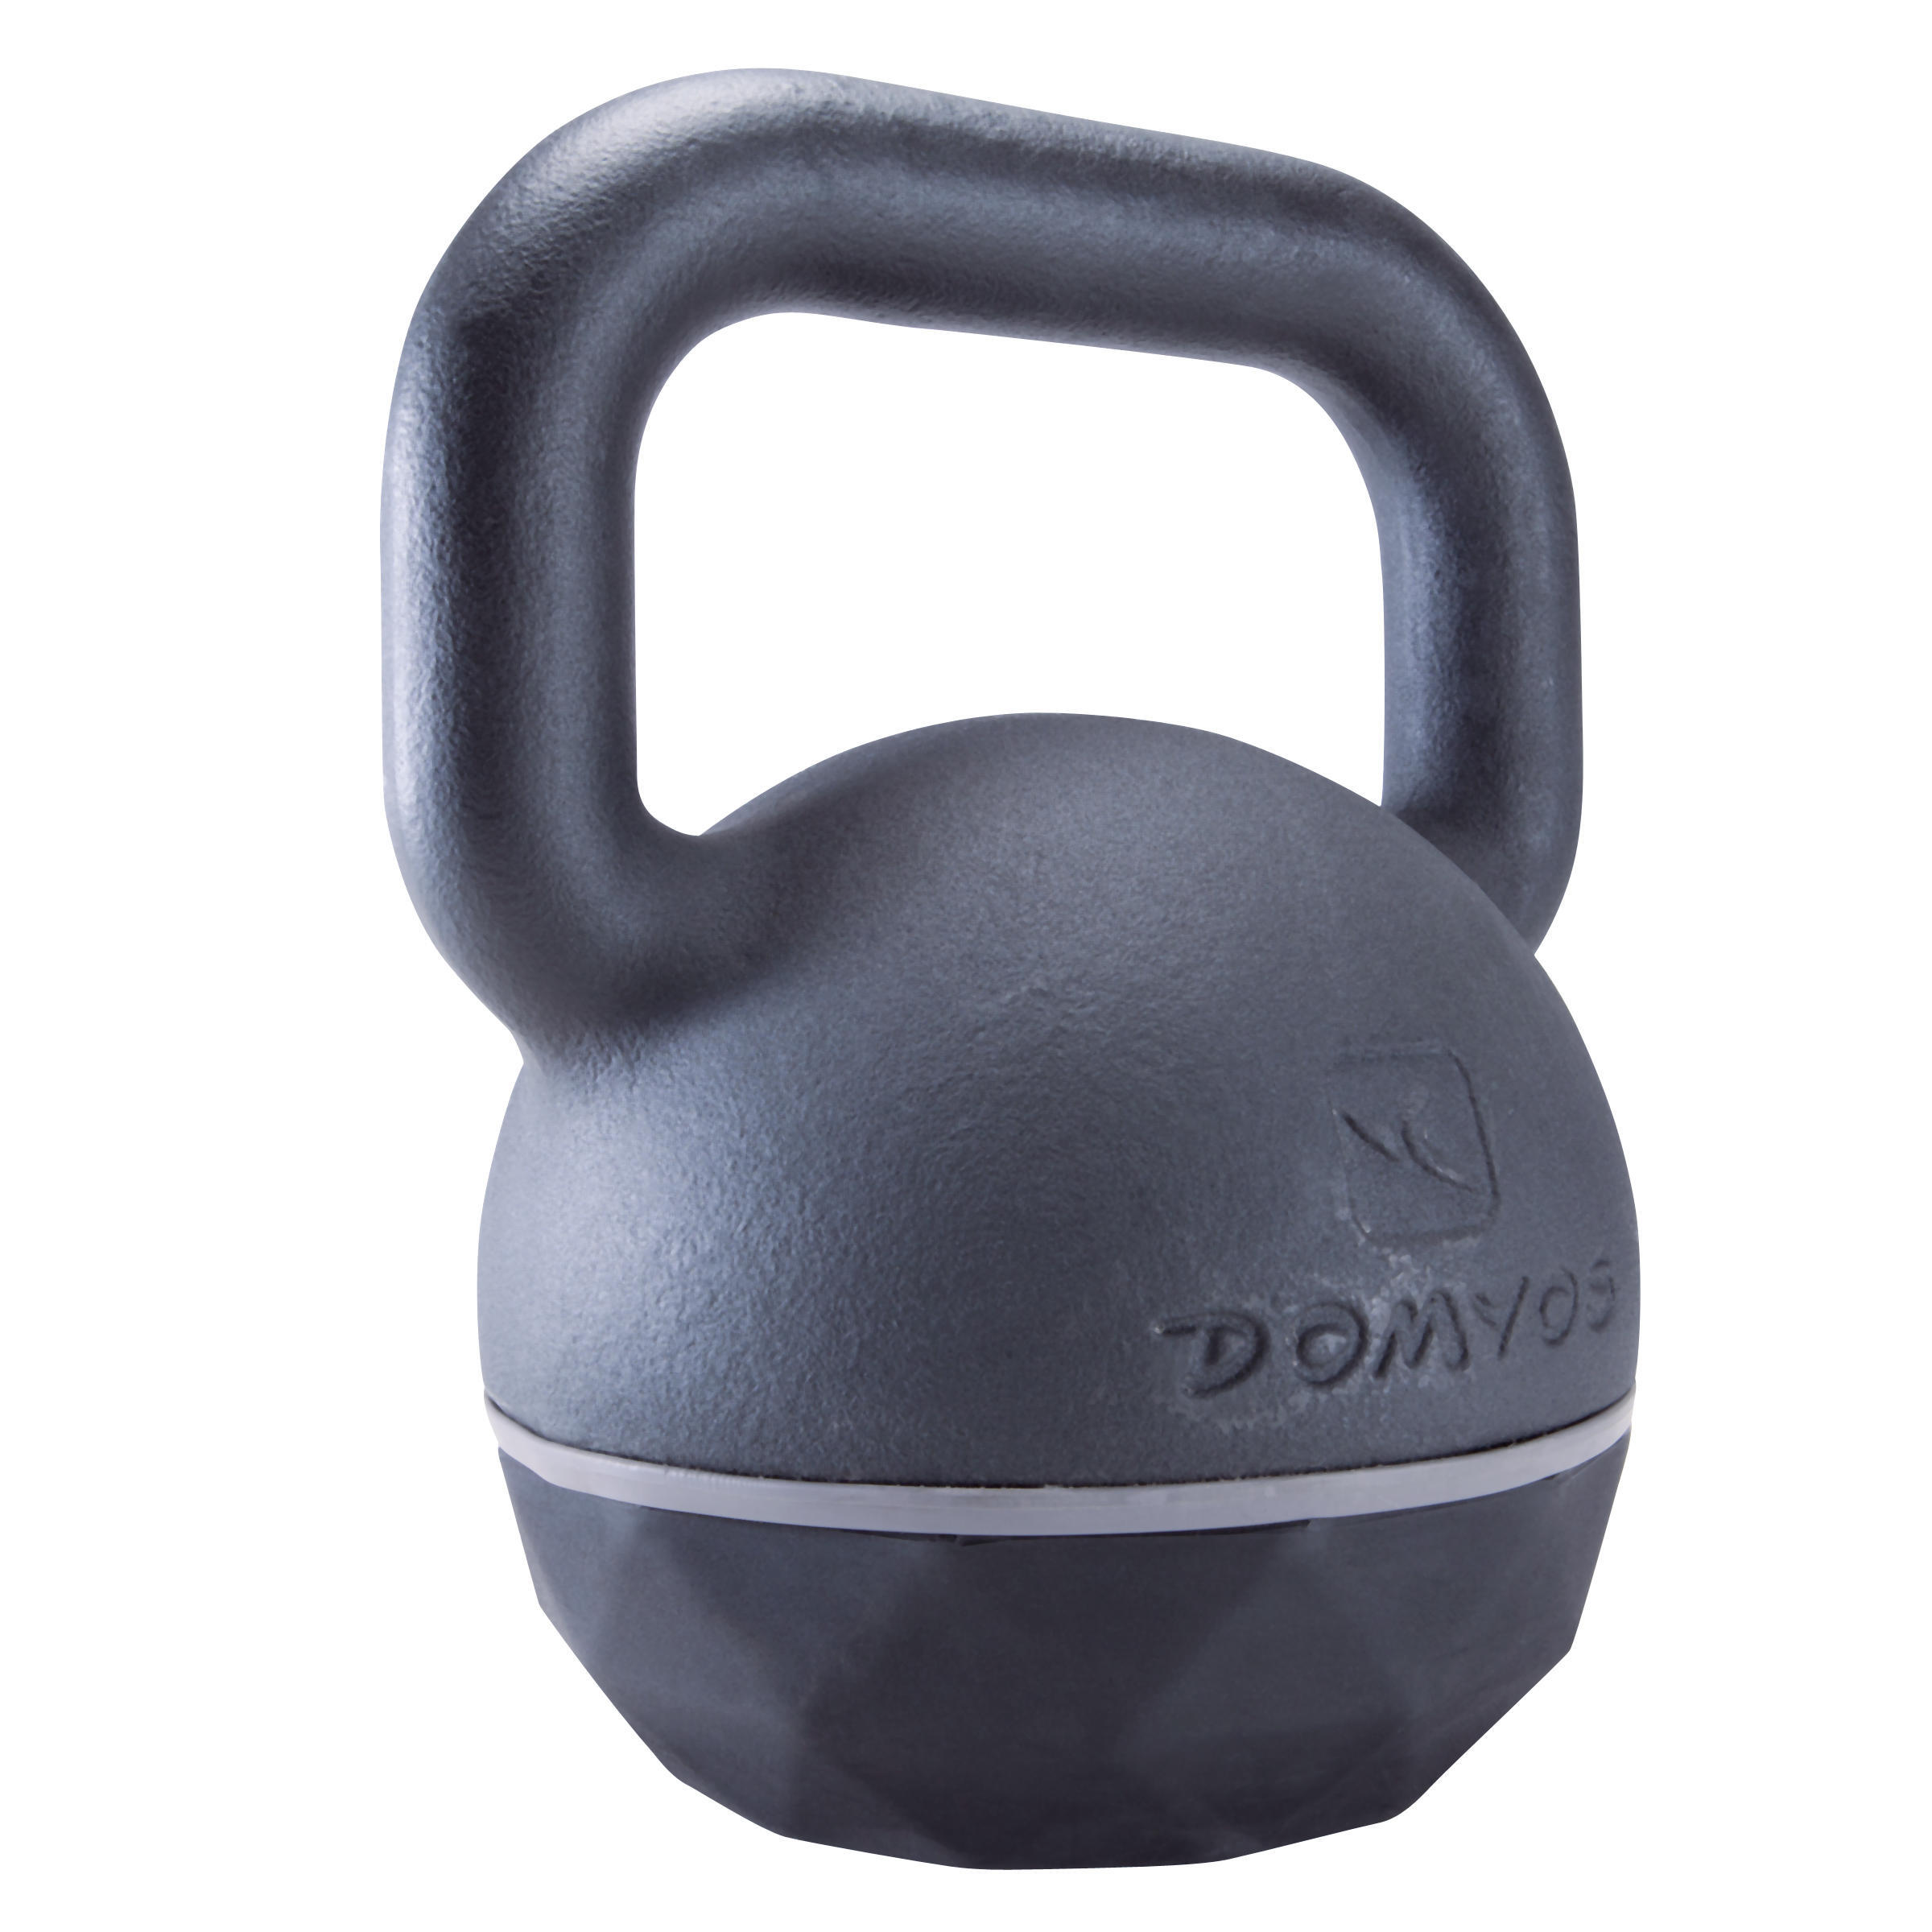 Cast Iron Kettlebell with Rubber Base - 24 kg 3/9